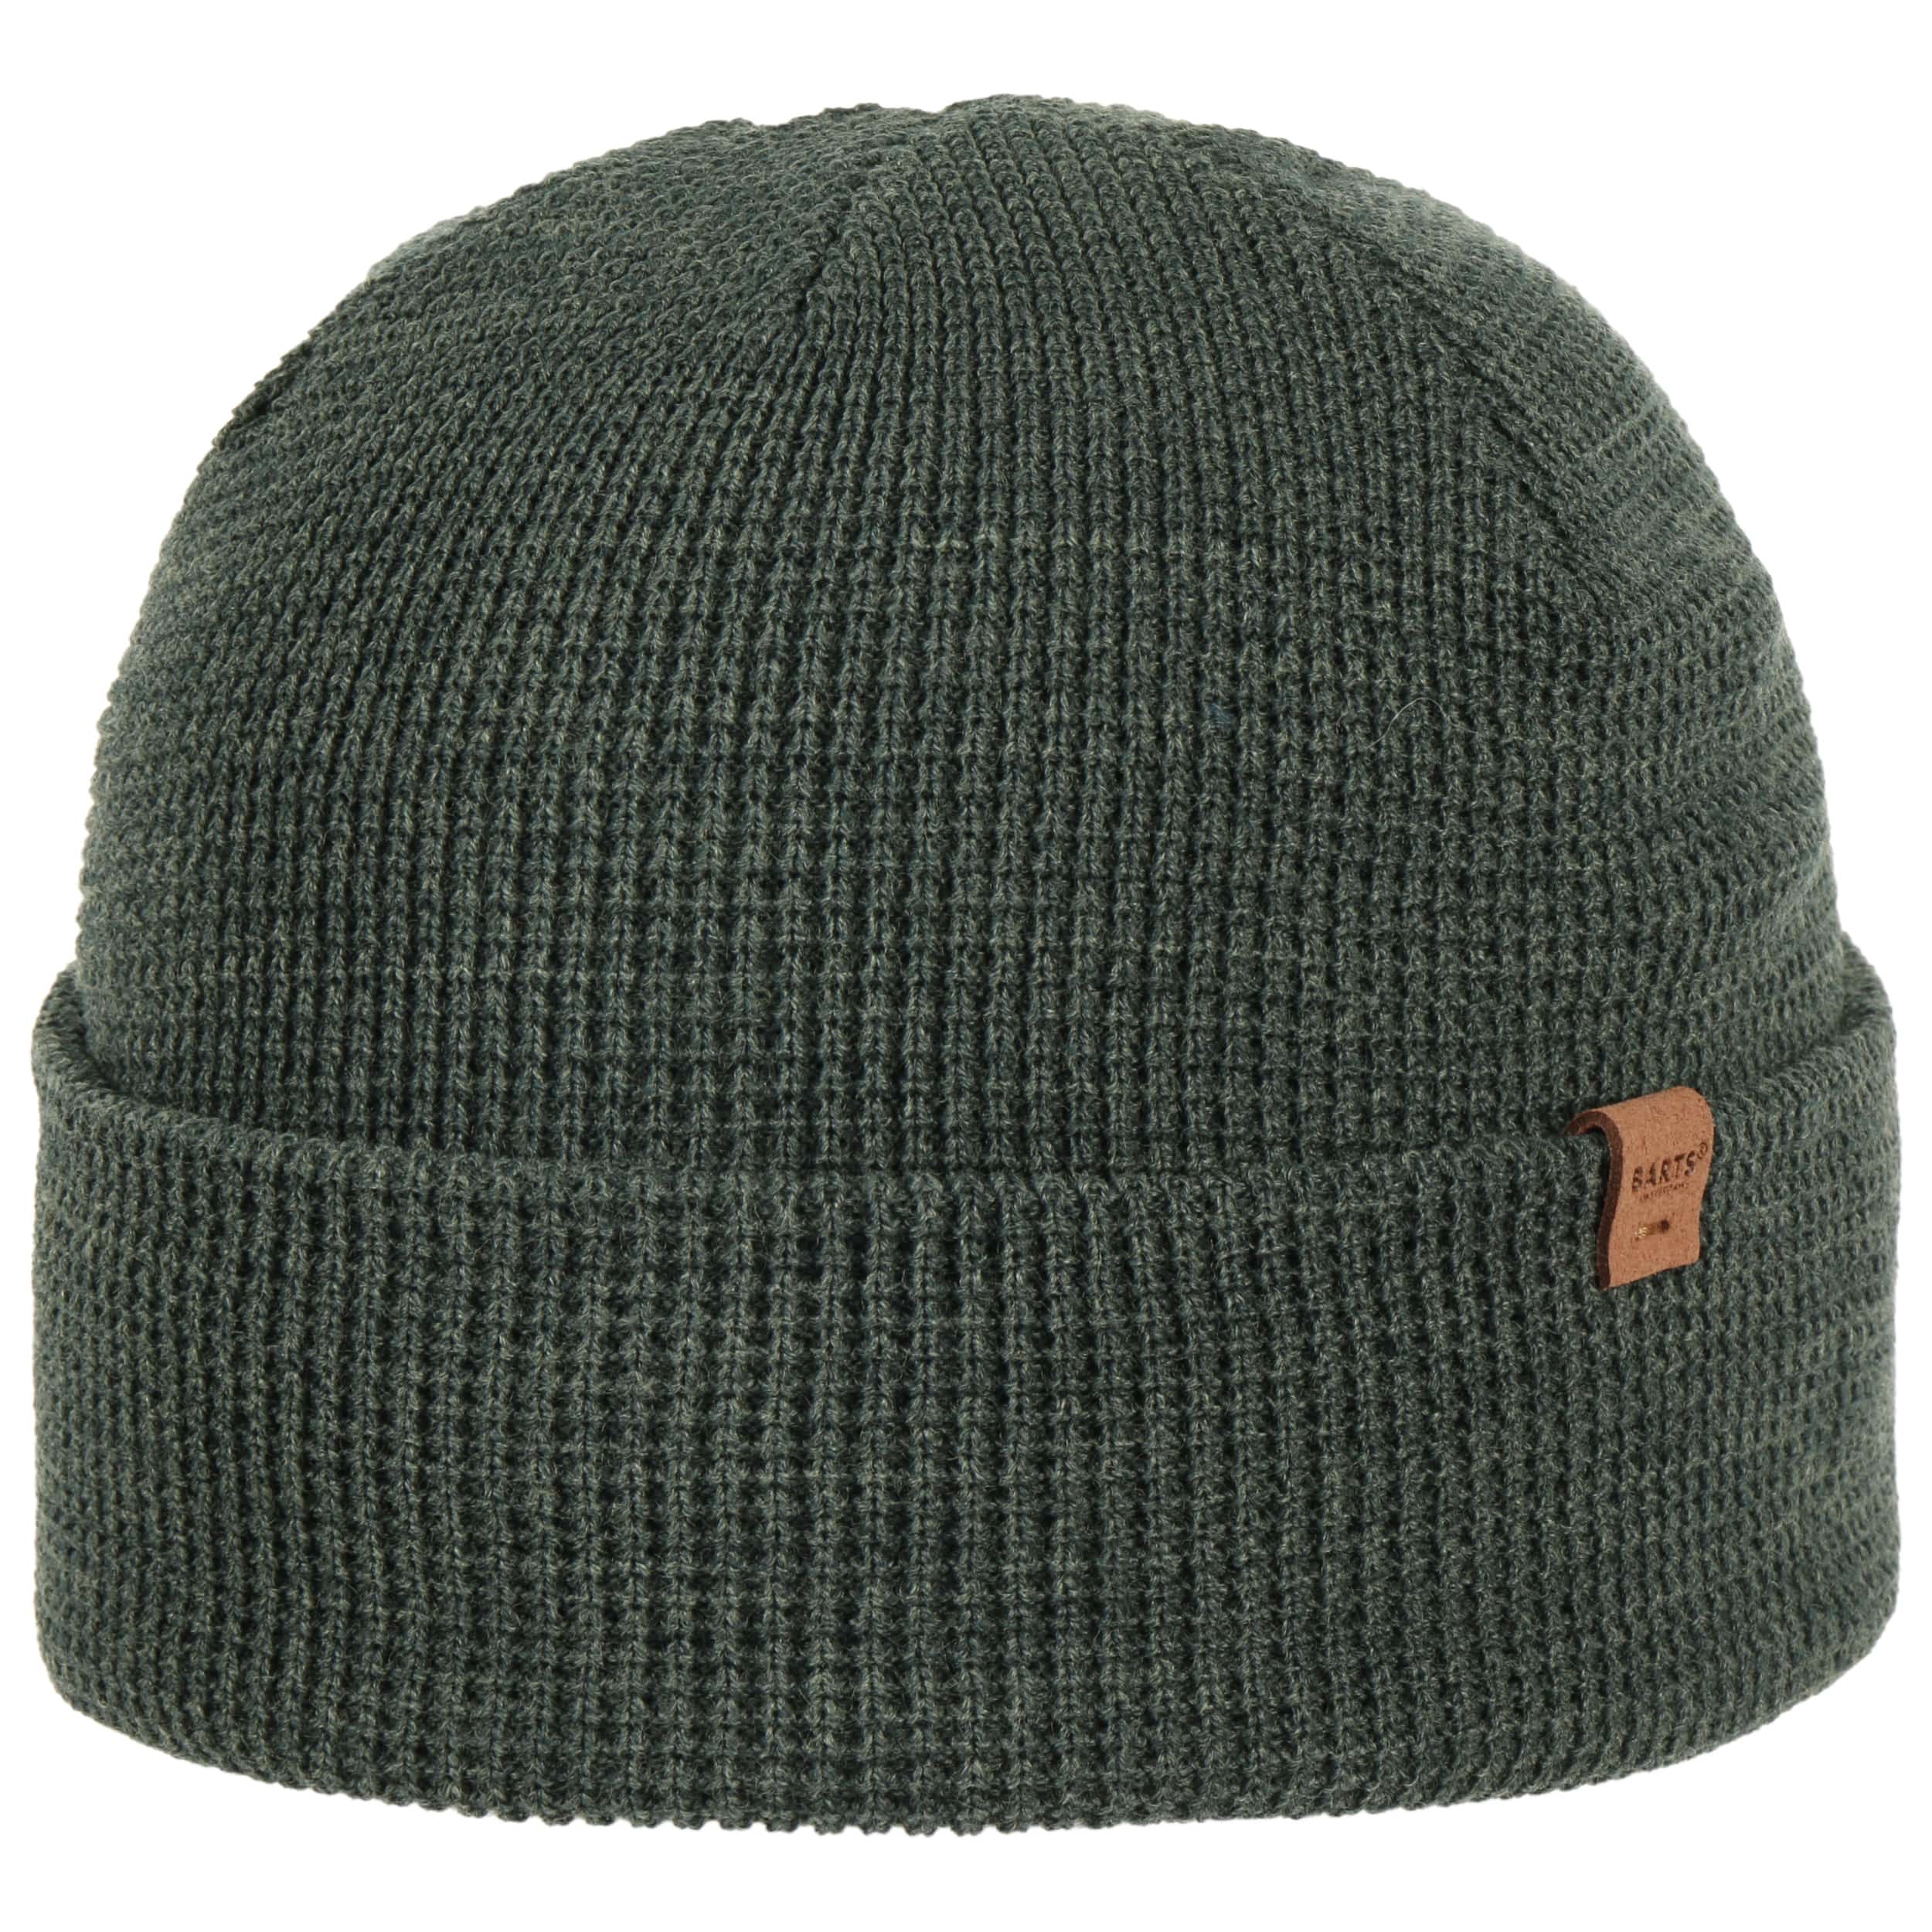 Coler Beanie Hat by Barts £ 22,95 